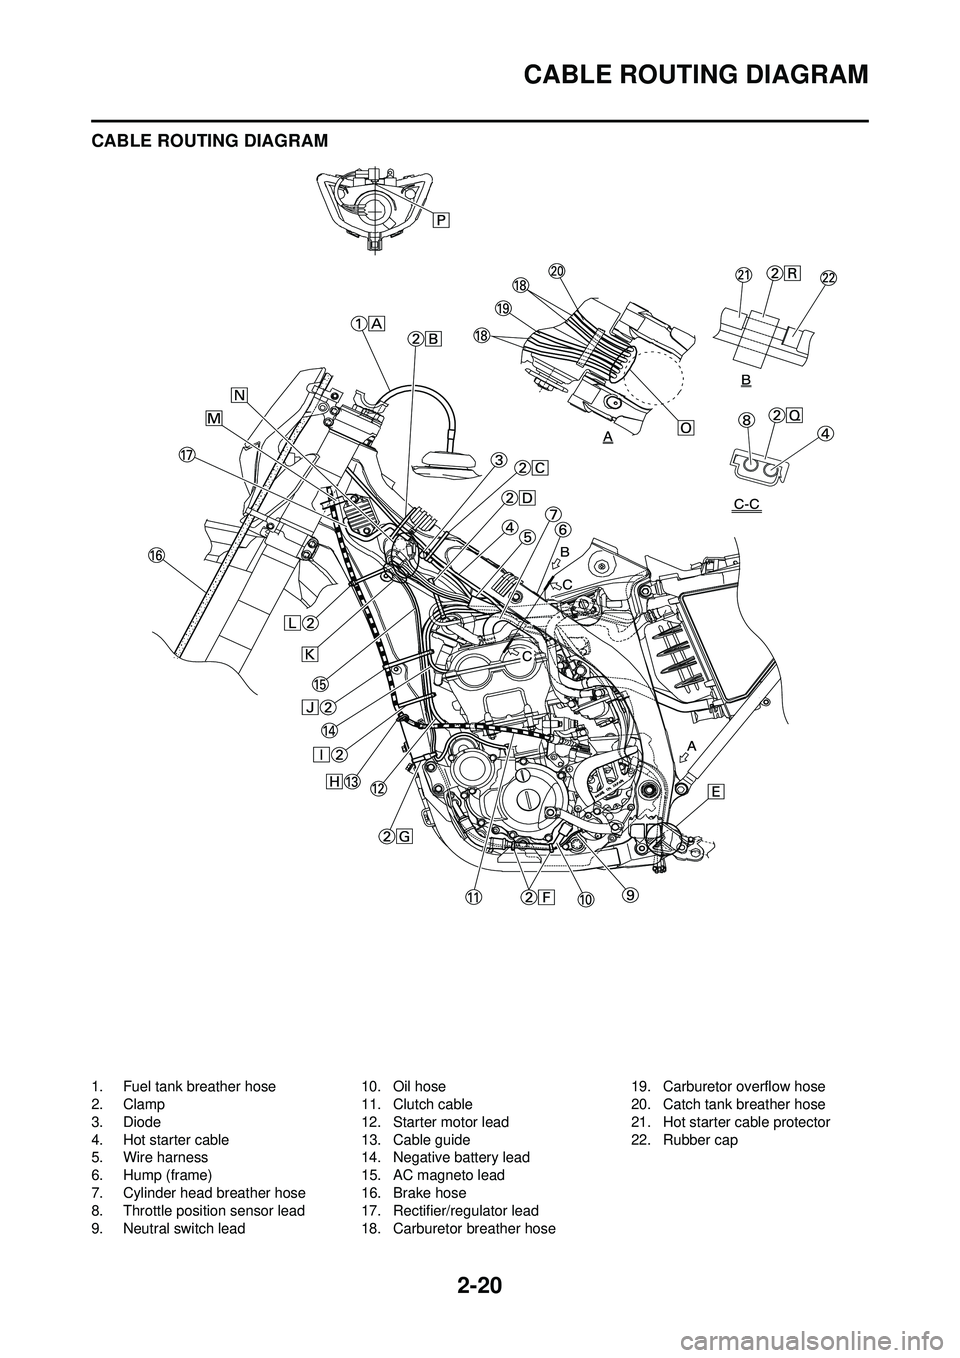 YAMAHA WR 250F 2009  Owners Manual 2-20
CABLE ROUTING DIAGRAM
CABLE ROUTING DIAGRAM
1. Fuel tank breather hose
2. Clamp
3. Diode
4. Hot starter cable
5. Wire harness
6. Hump (frame)
7. Cylinder head breather hose
8. Throttle position s